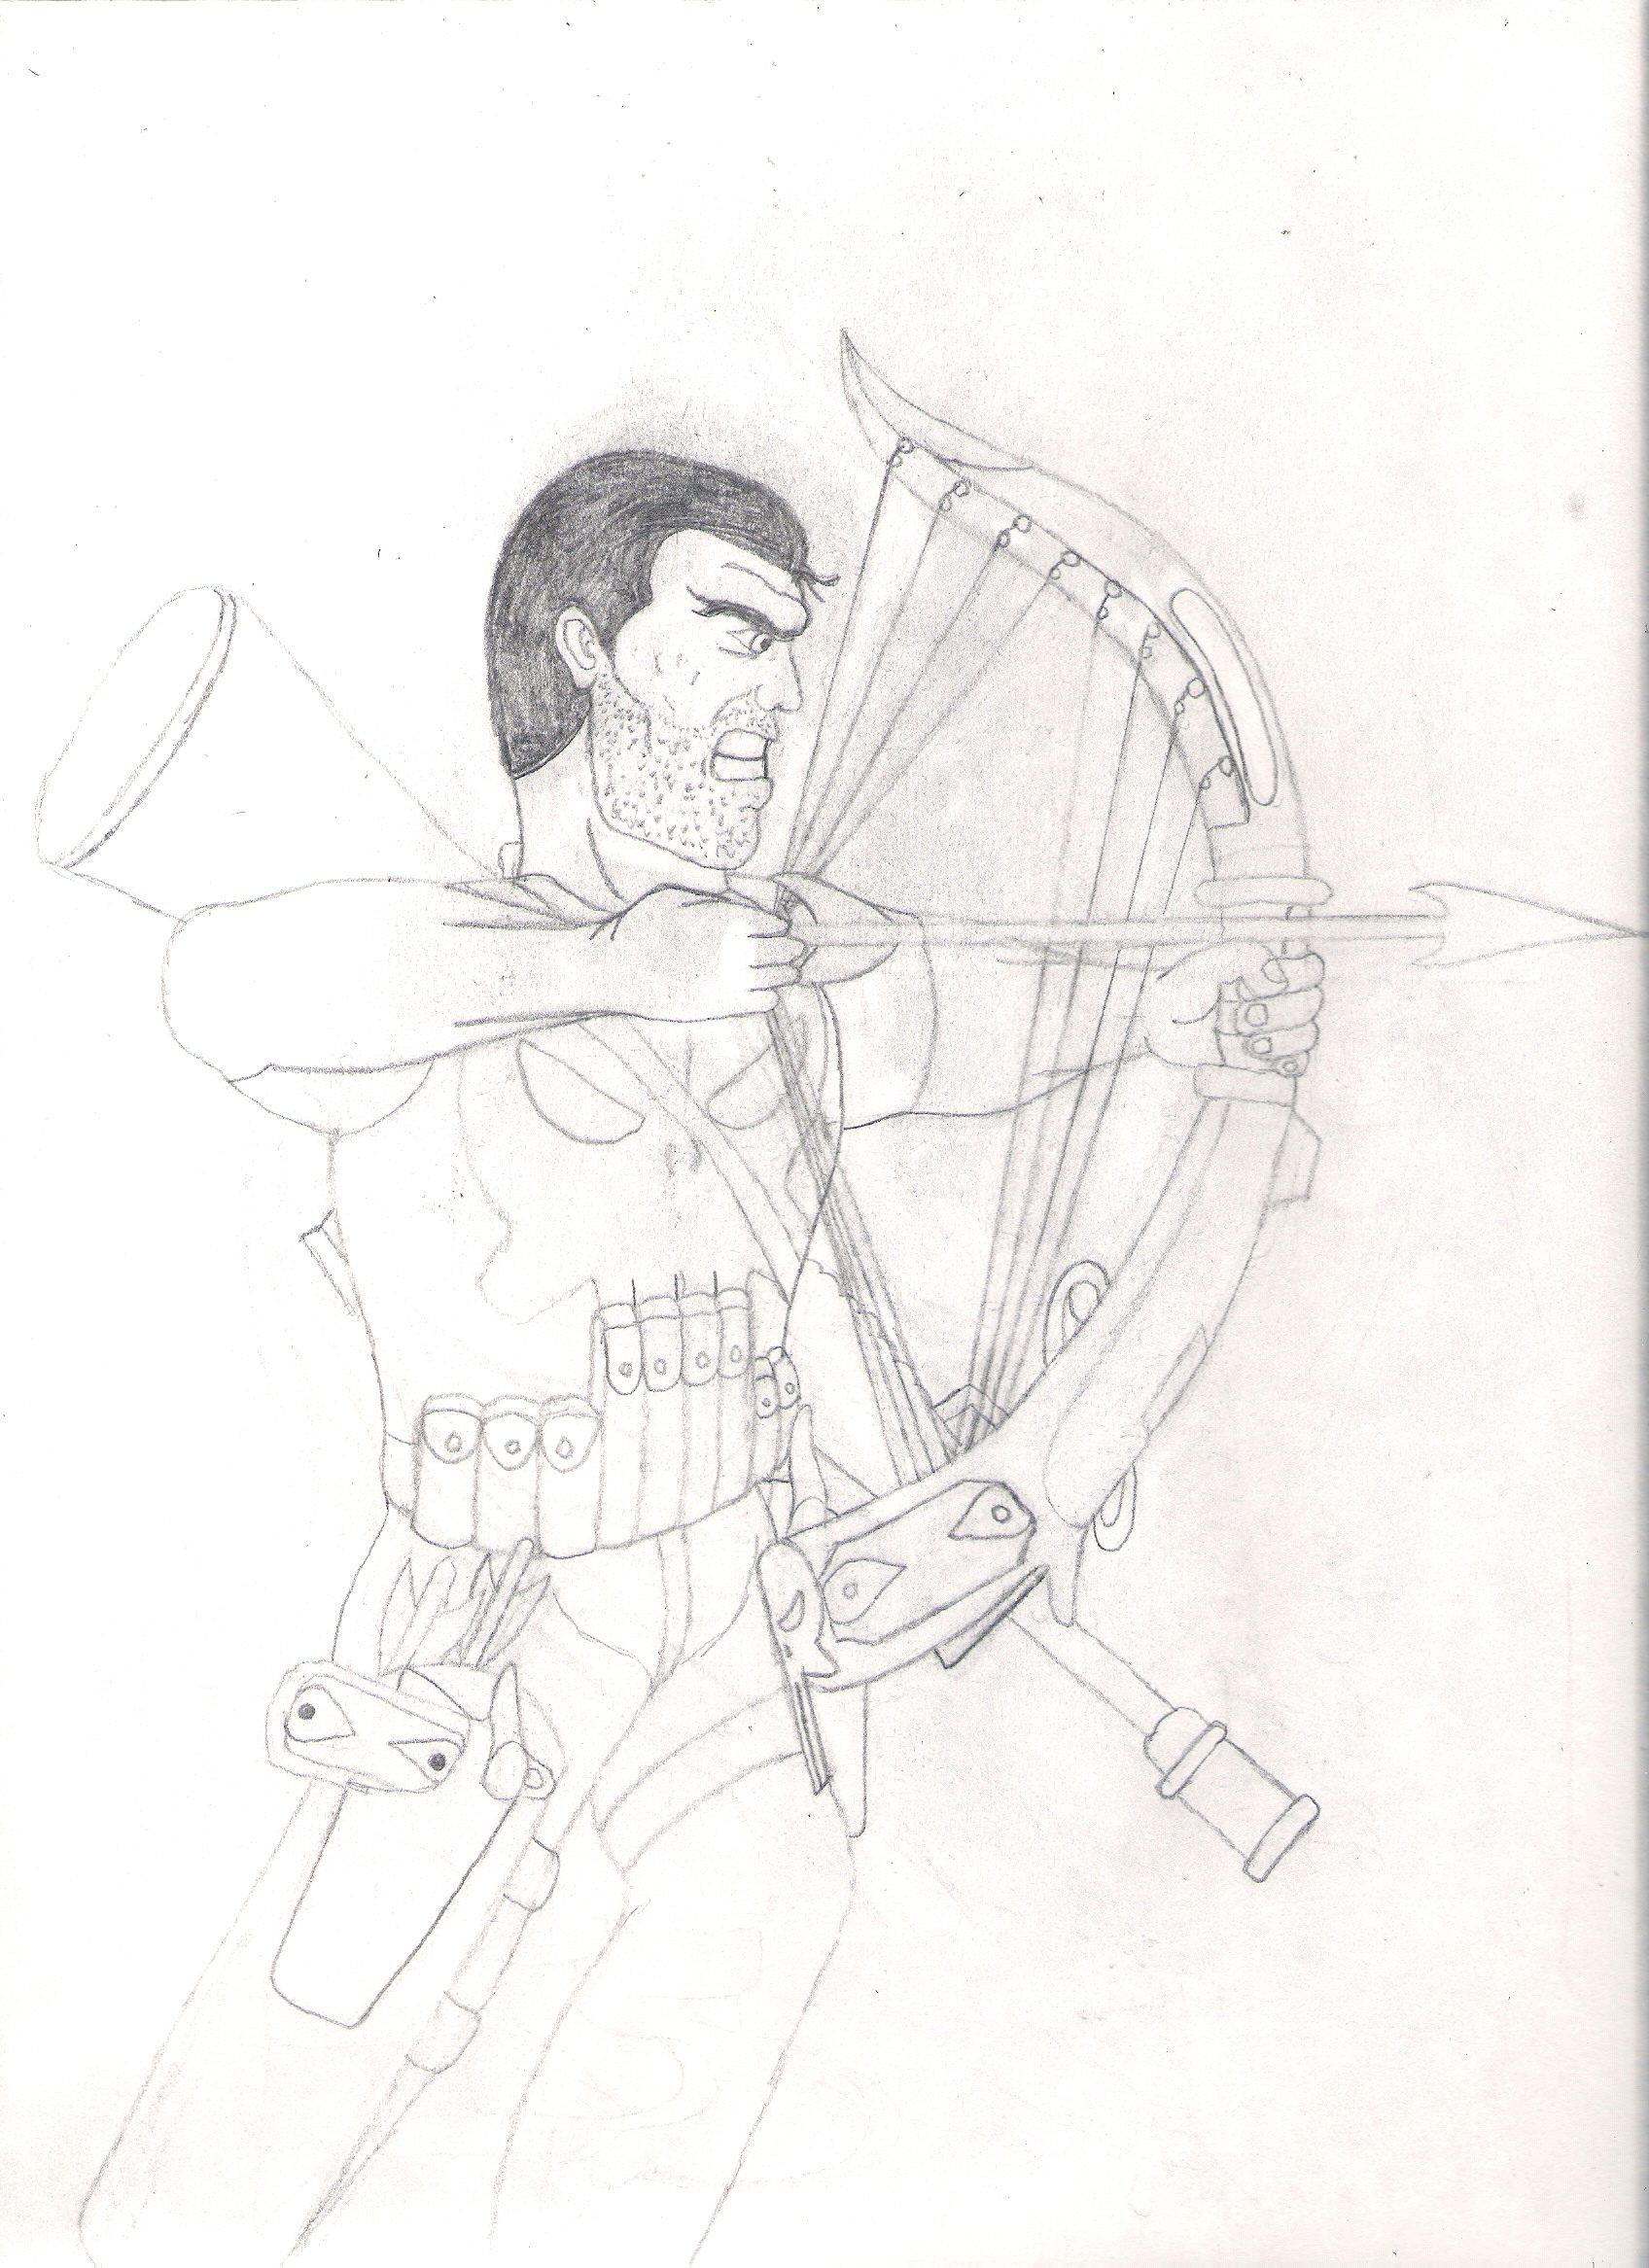 More Punisher Harp sketches